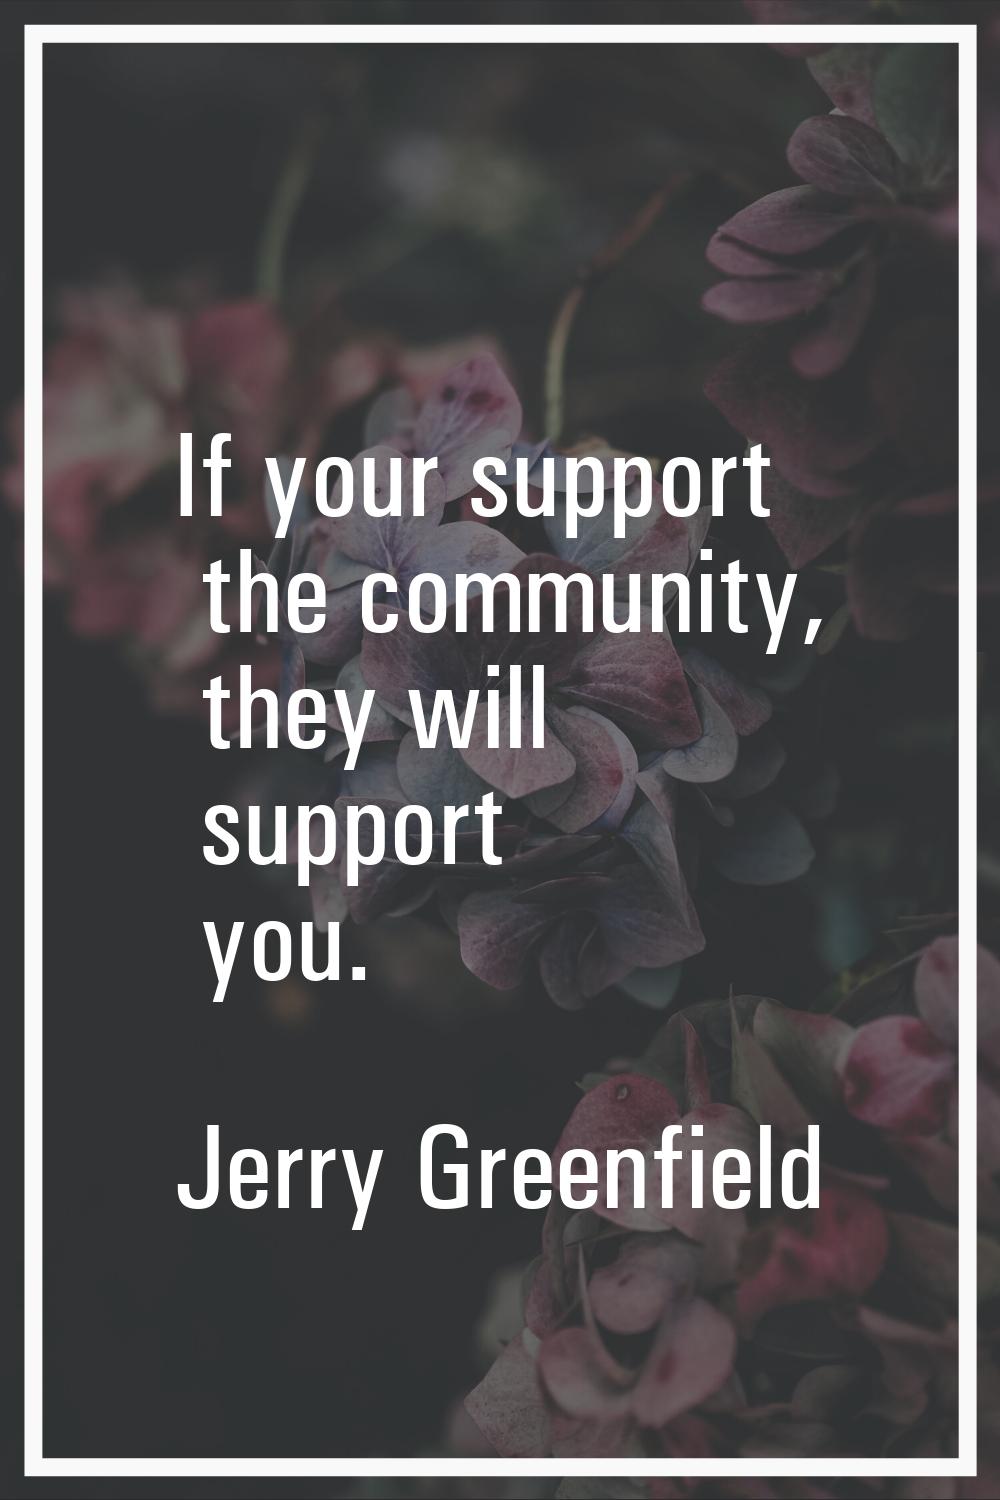 If your support the community, they will support you.